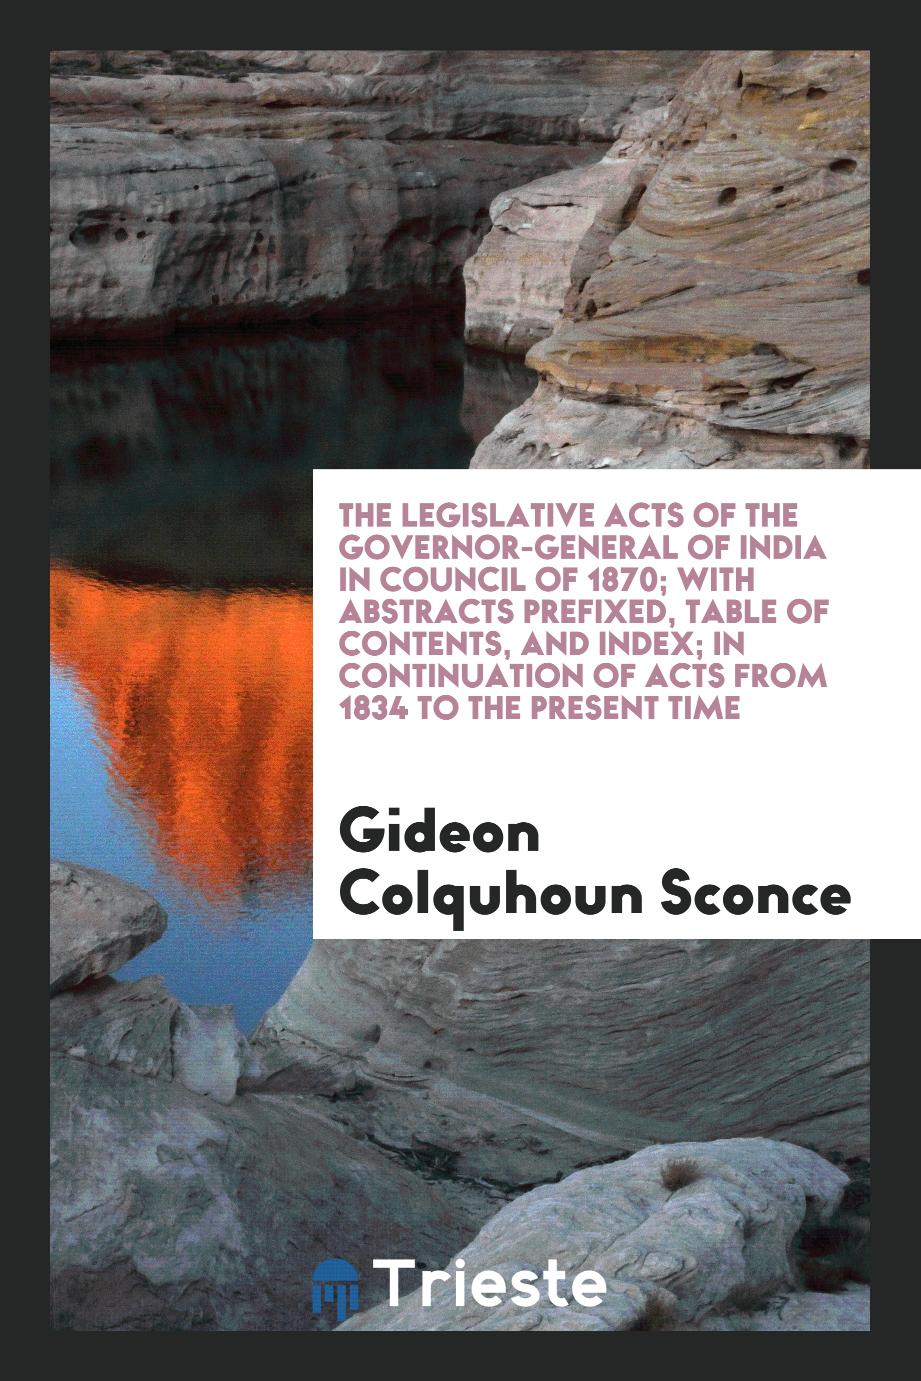 The Legislative Acts of the Governor-General of India in Council of 1870; With Abstracts Prefixed, Table of Contents, and Index; In Continuation of Acts from 1834 to the Present Time